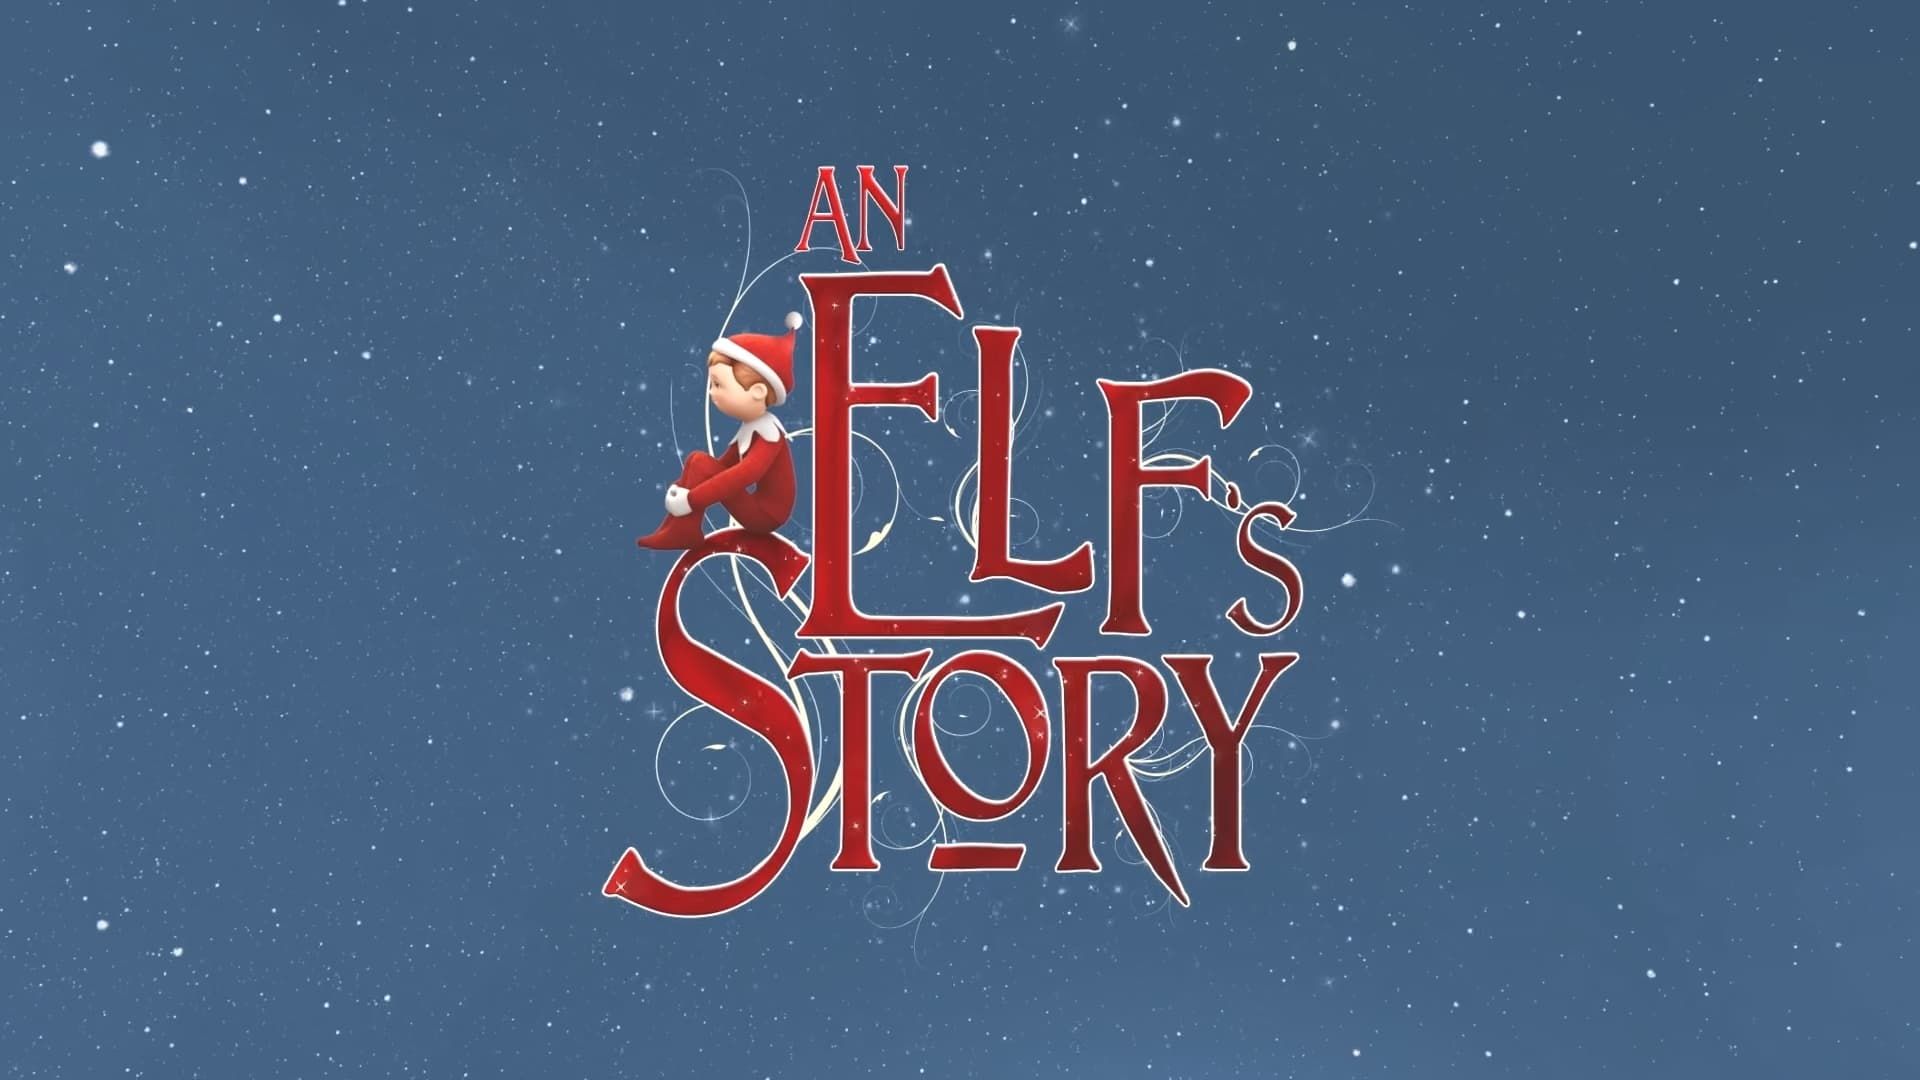 An Elf's Story: The Elf on the Shelf background